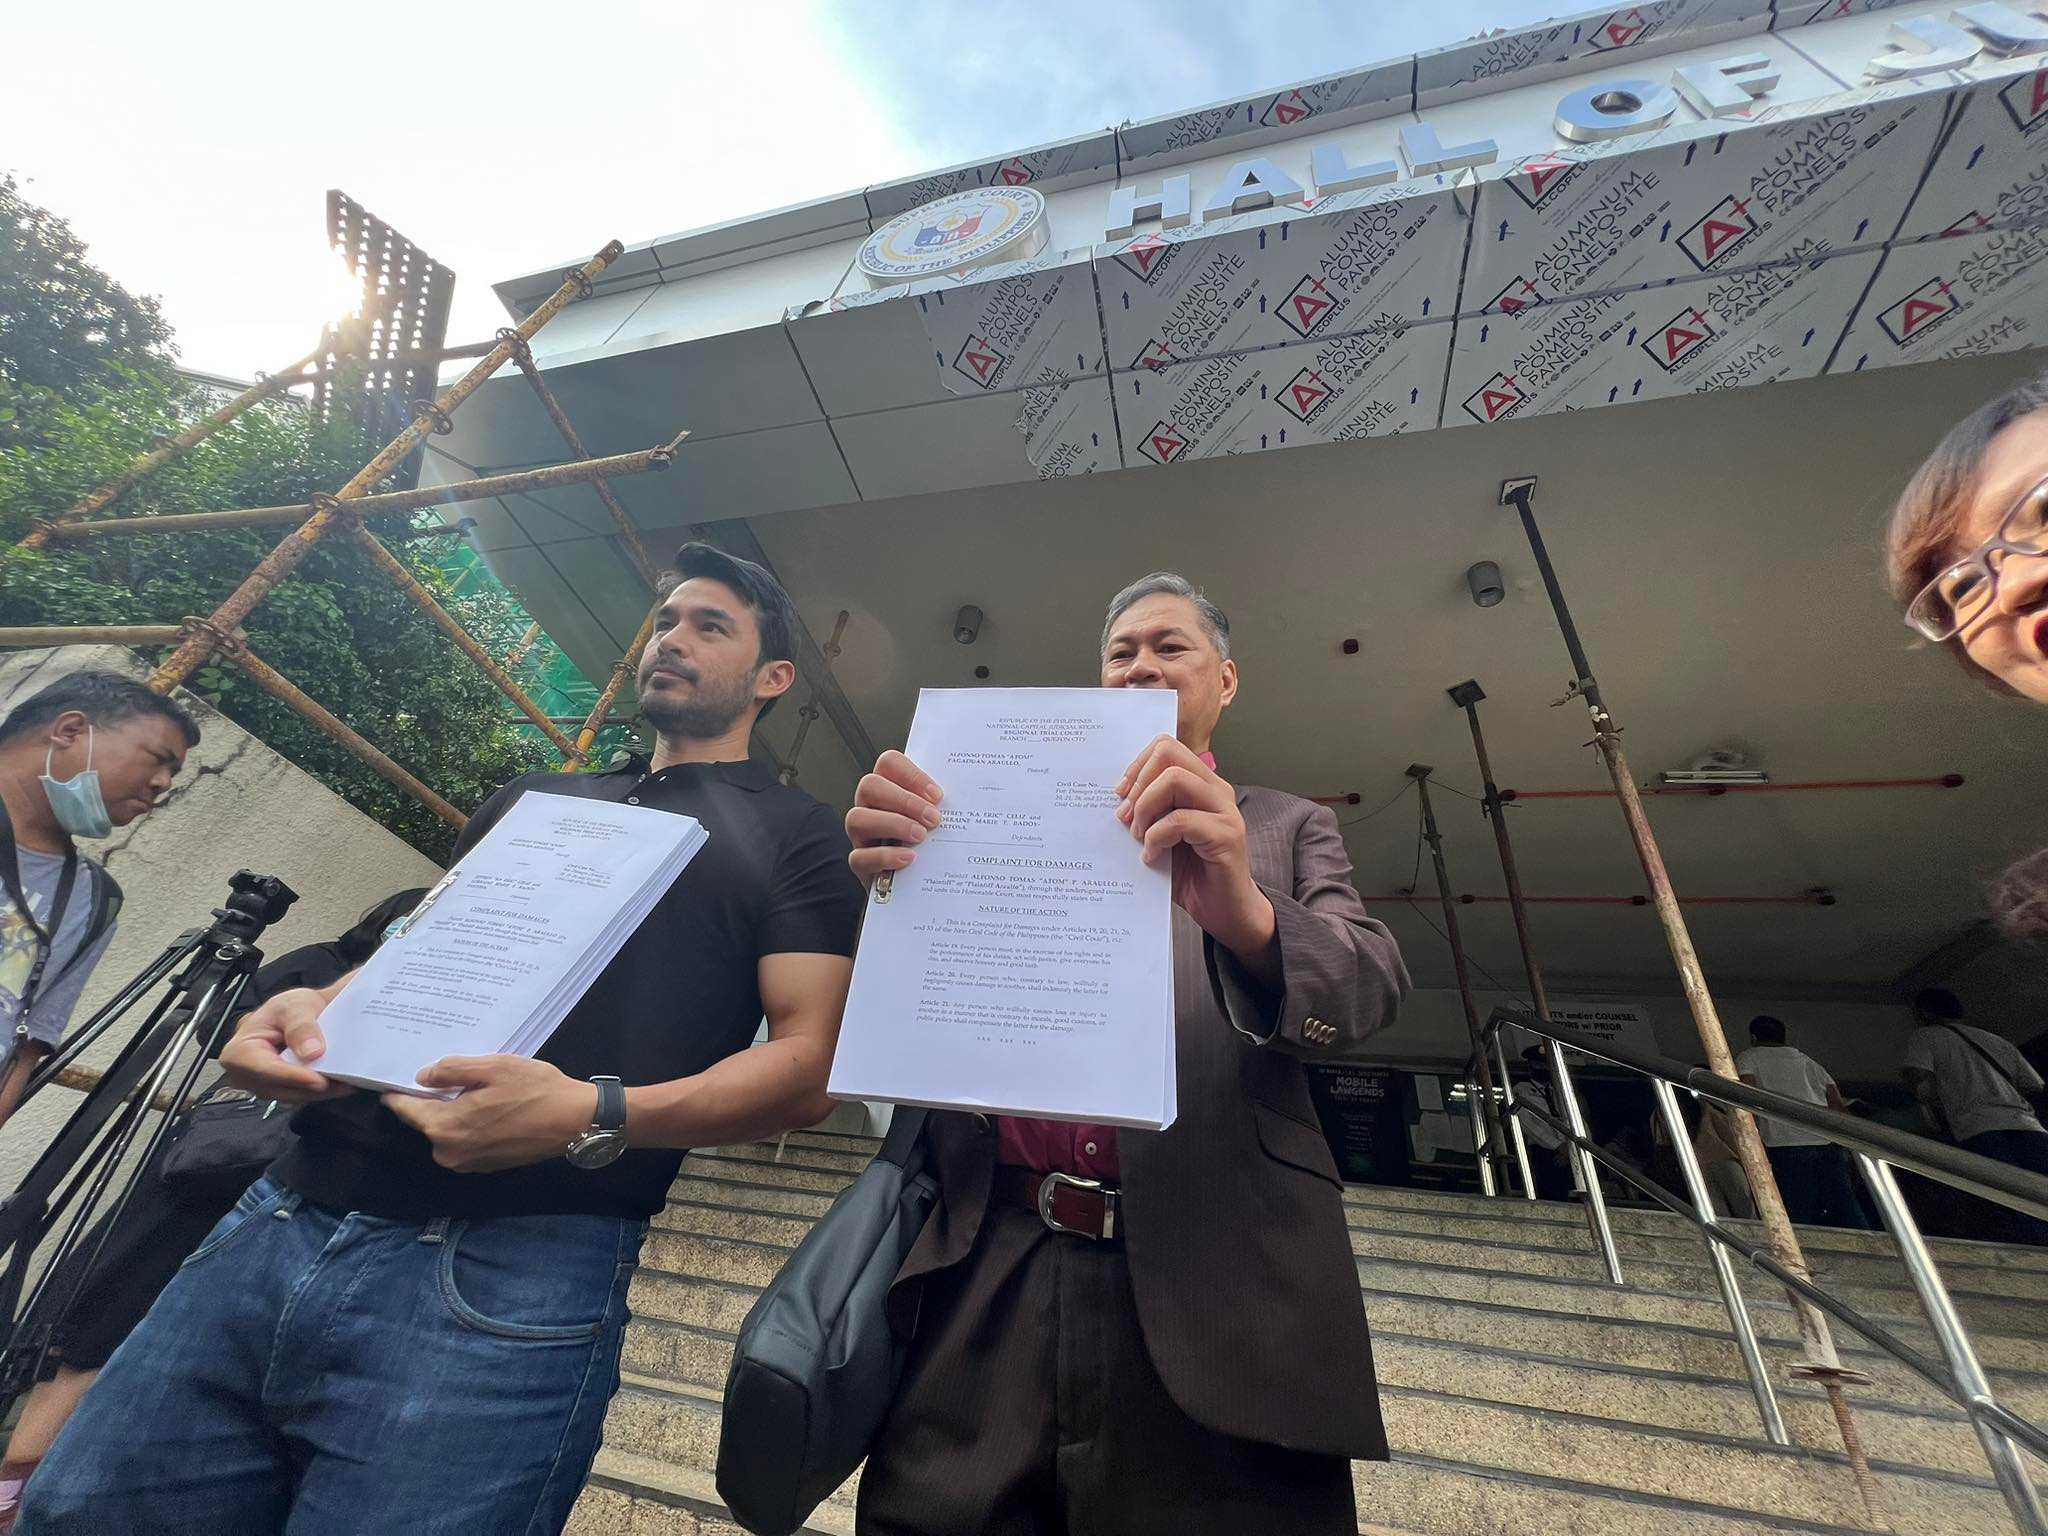 Atom Araullo files P2-M damage suit vs. SMNI hosts over alleged 'red tagging'